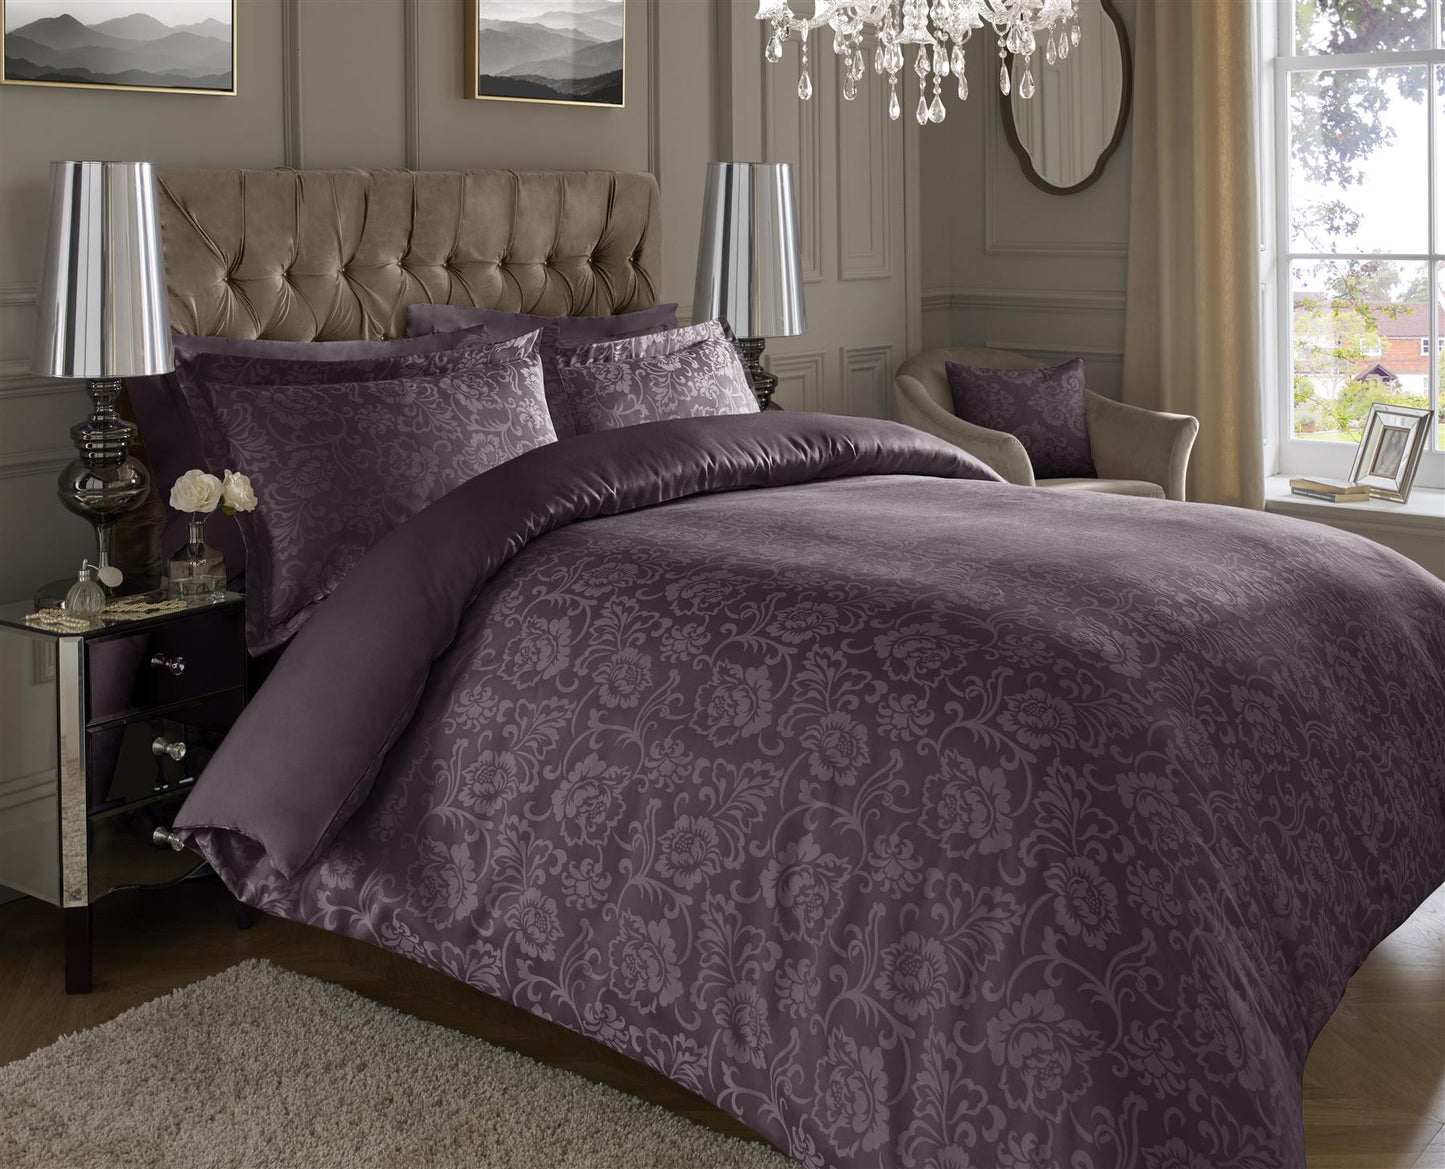 Add a Touch of Elegance with a Floral Jacquard Duvet Cover